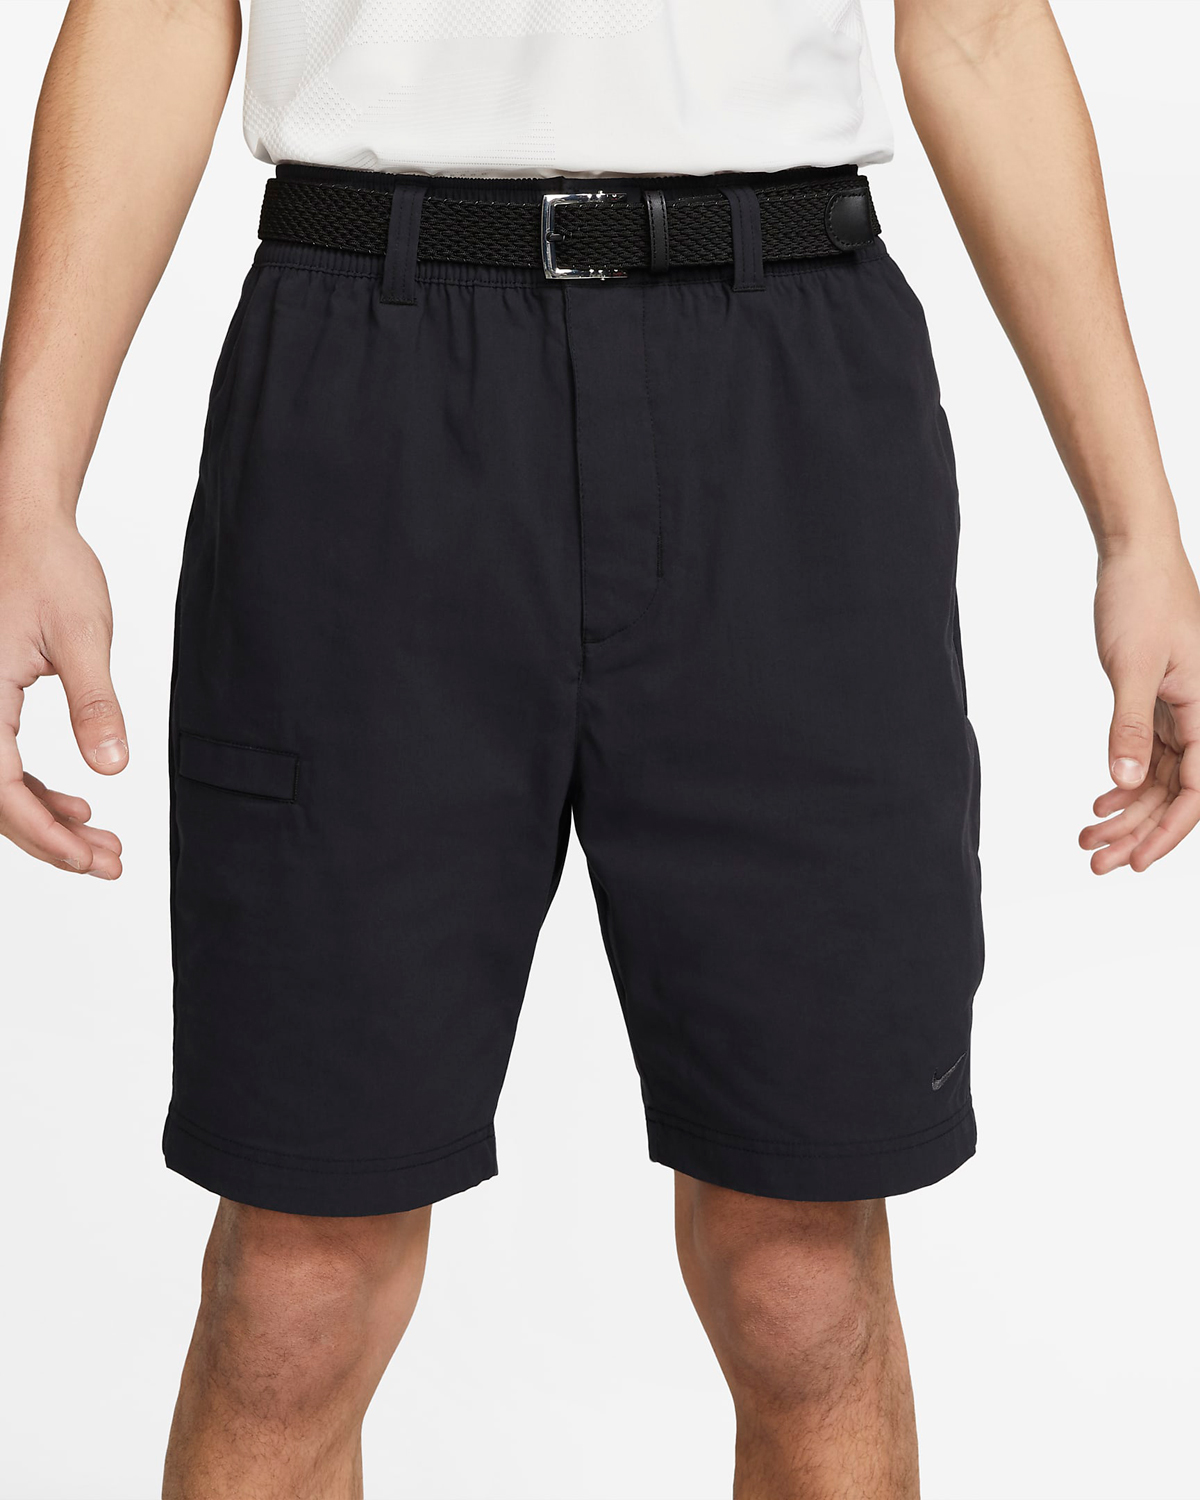 Nike-Unscripted-Golf-Shorts-Black-2